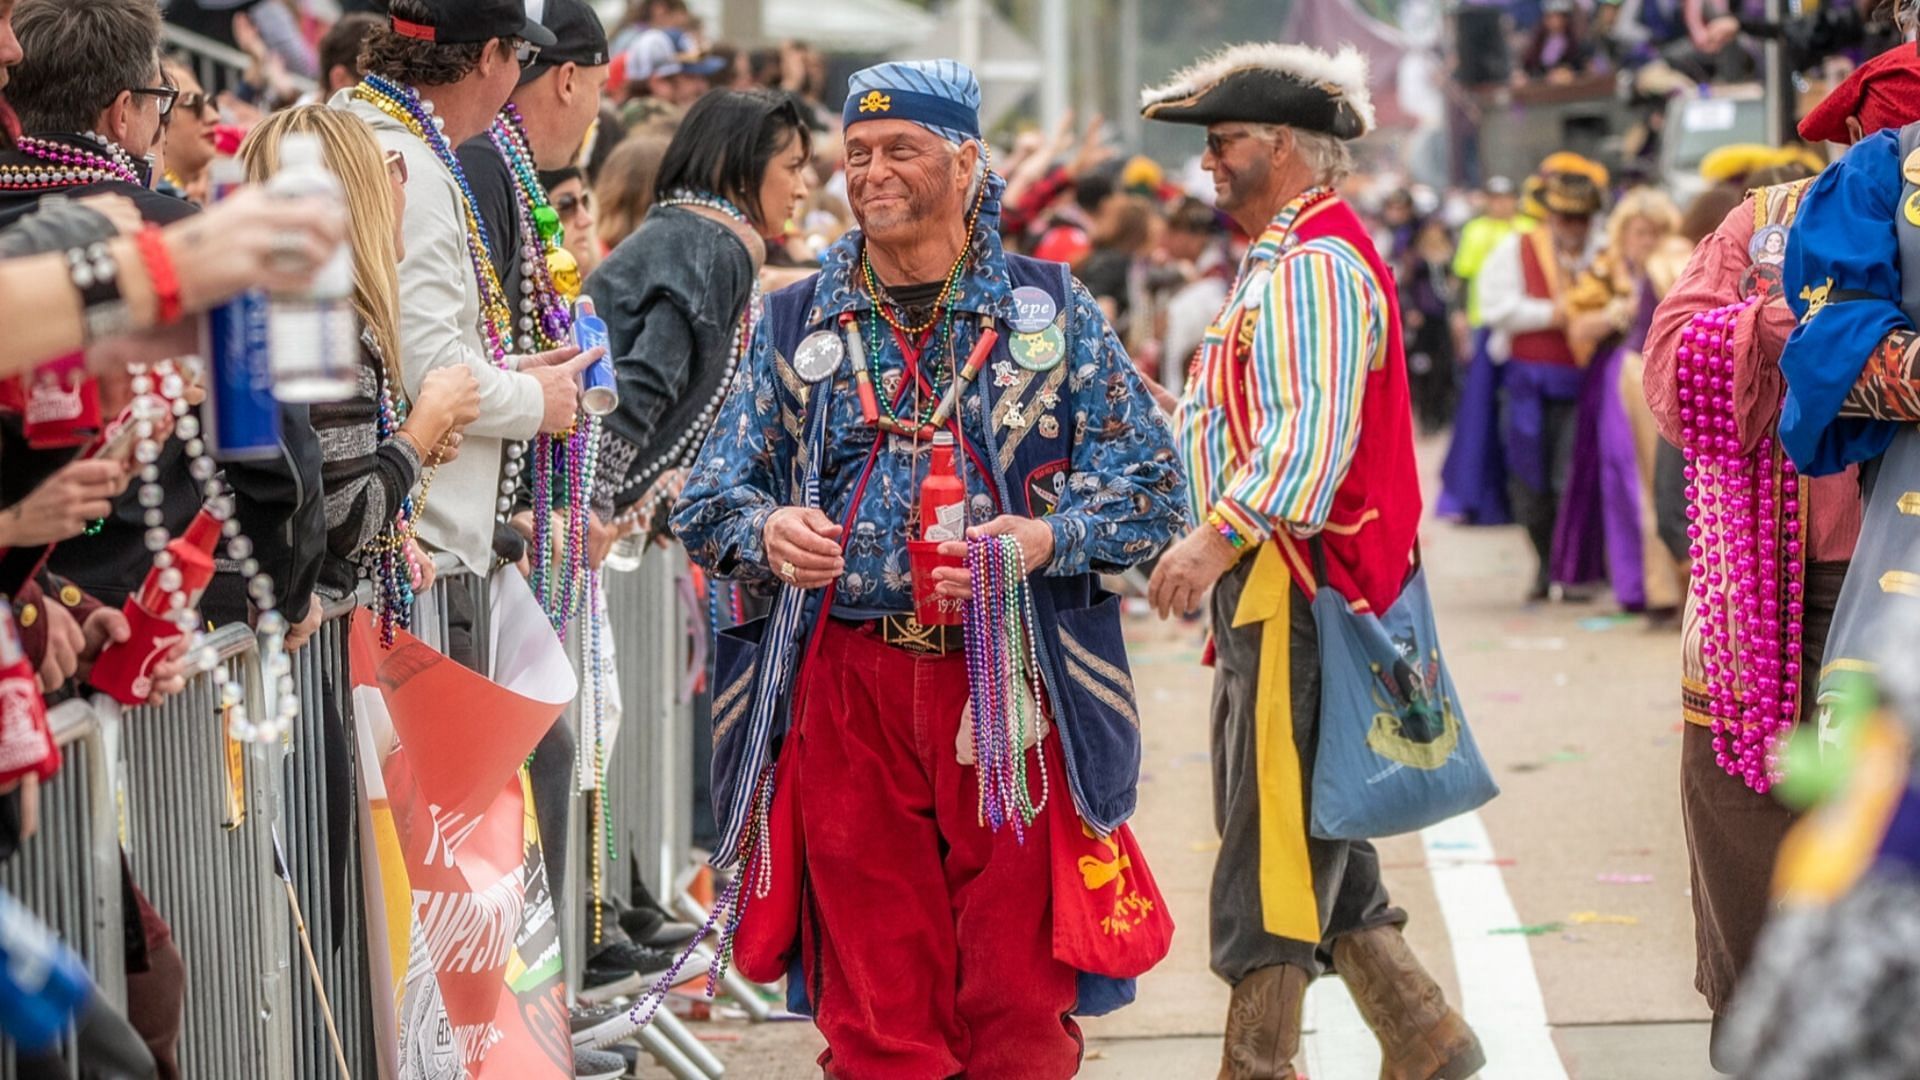 Gasparilla events will be held in January next year. (Image via ymkg)